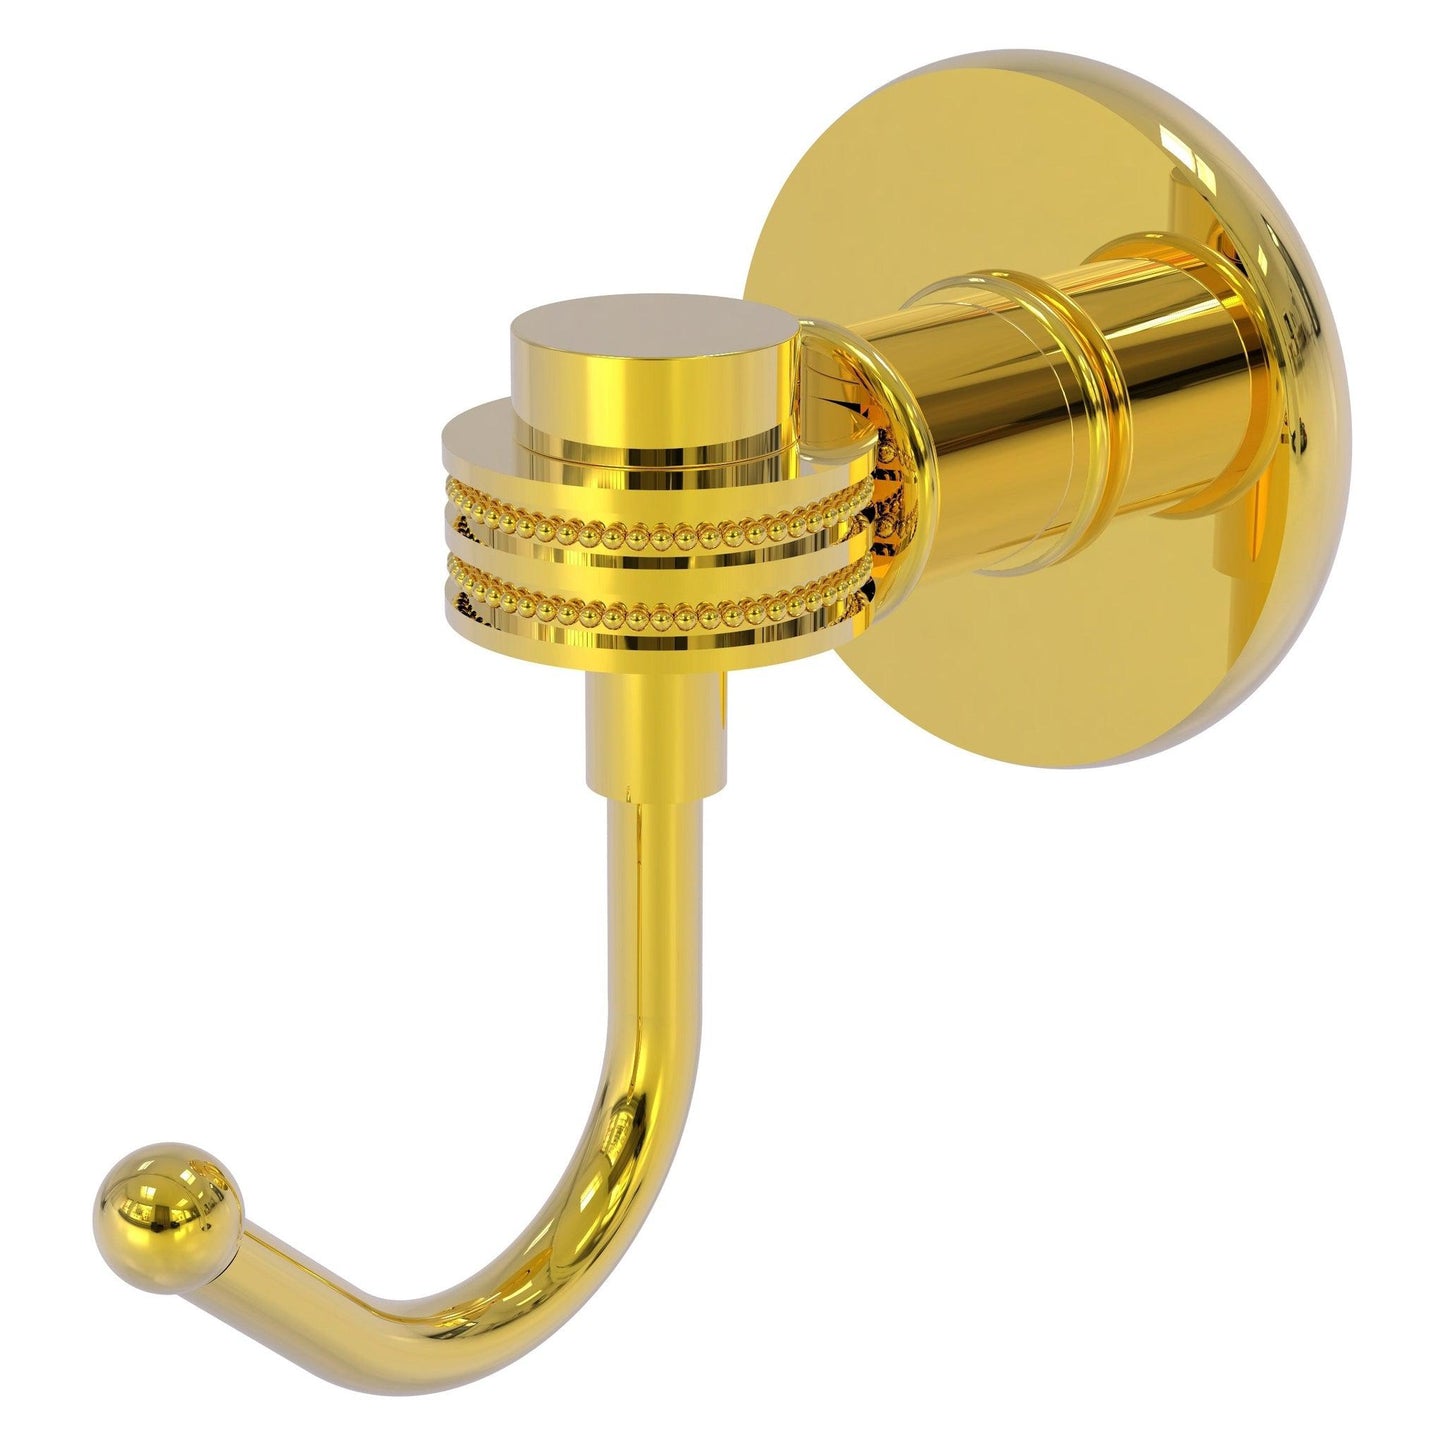 Allied Brass Skyline 2020D 2.8" x 4.77" Polished Brass Solid Brass Robe Hook With Dotted Accents